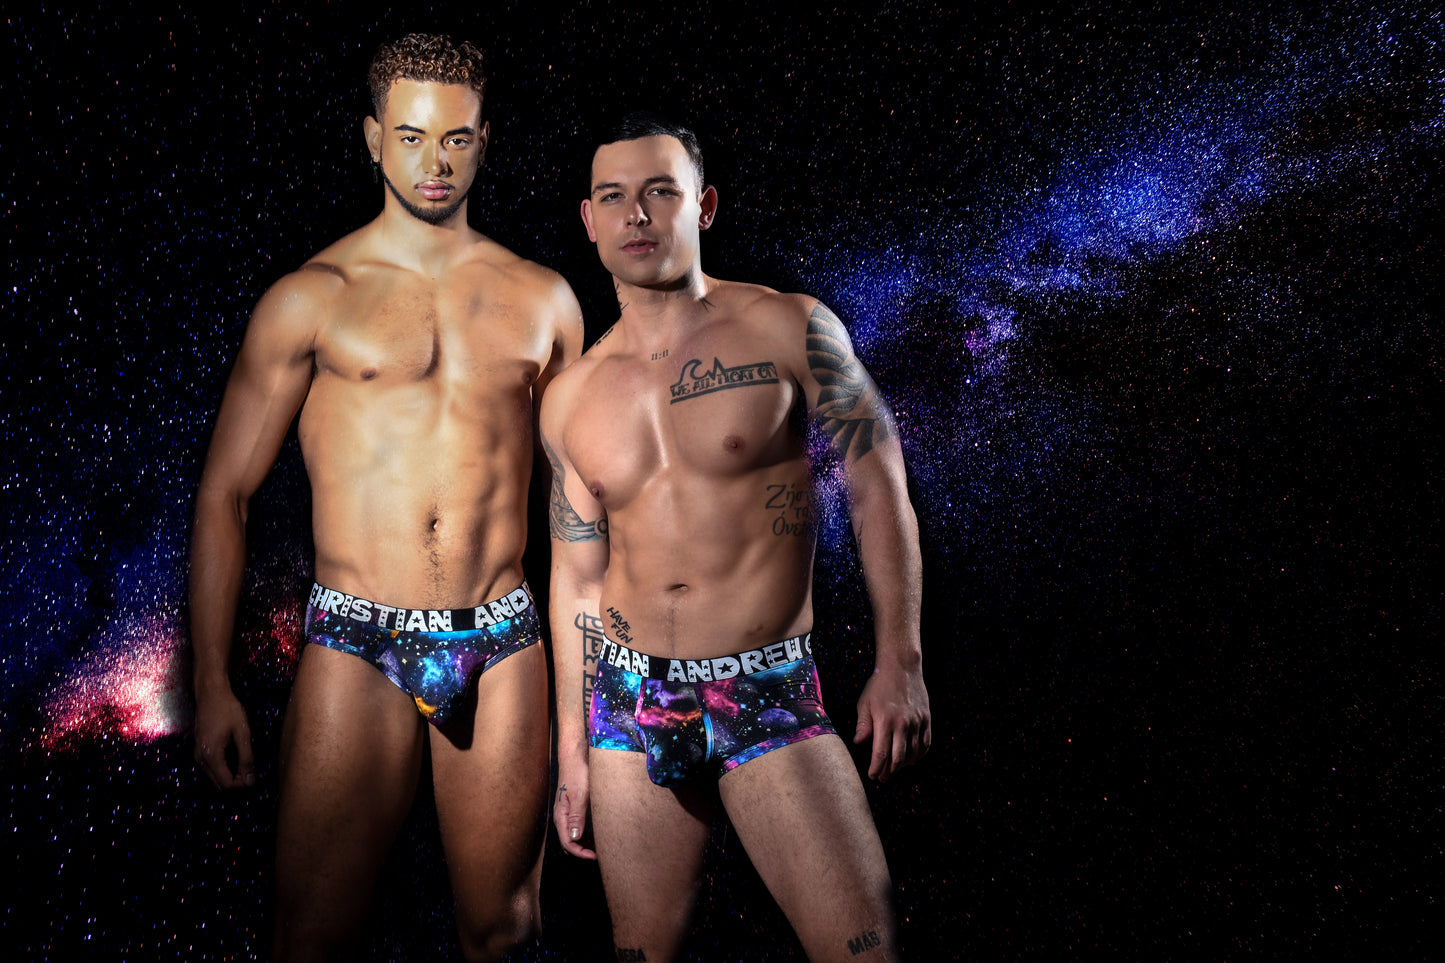 Andrew Christian: Universe Brief